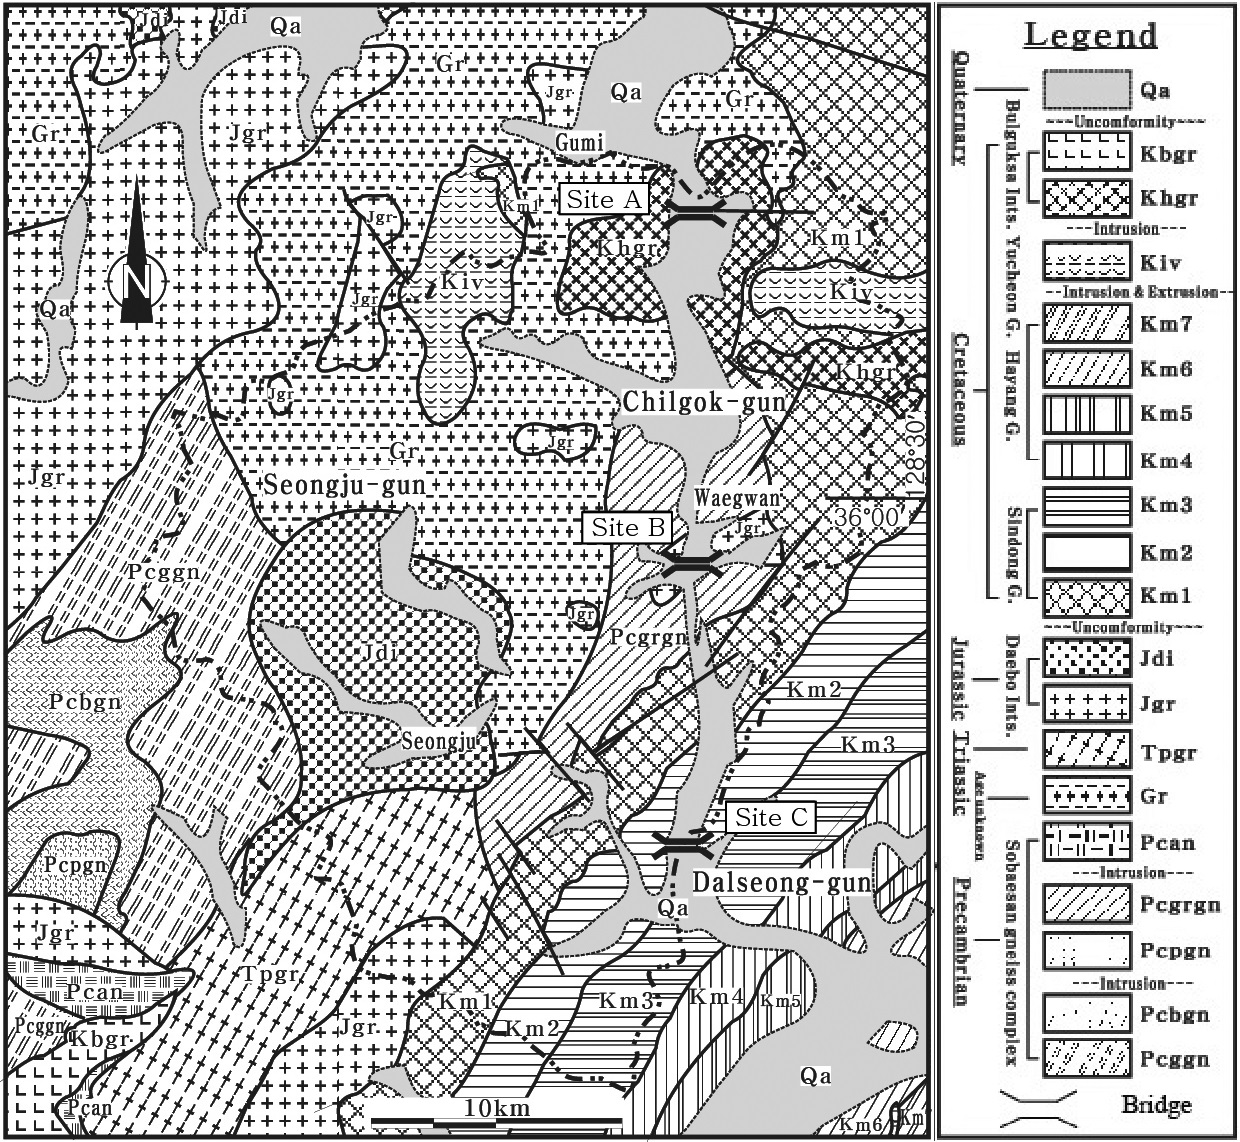 Geological map of the study area, slightly modified from [16, 17].